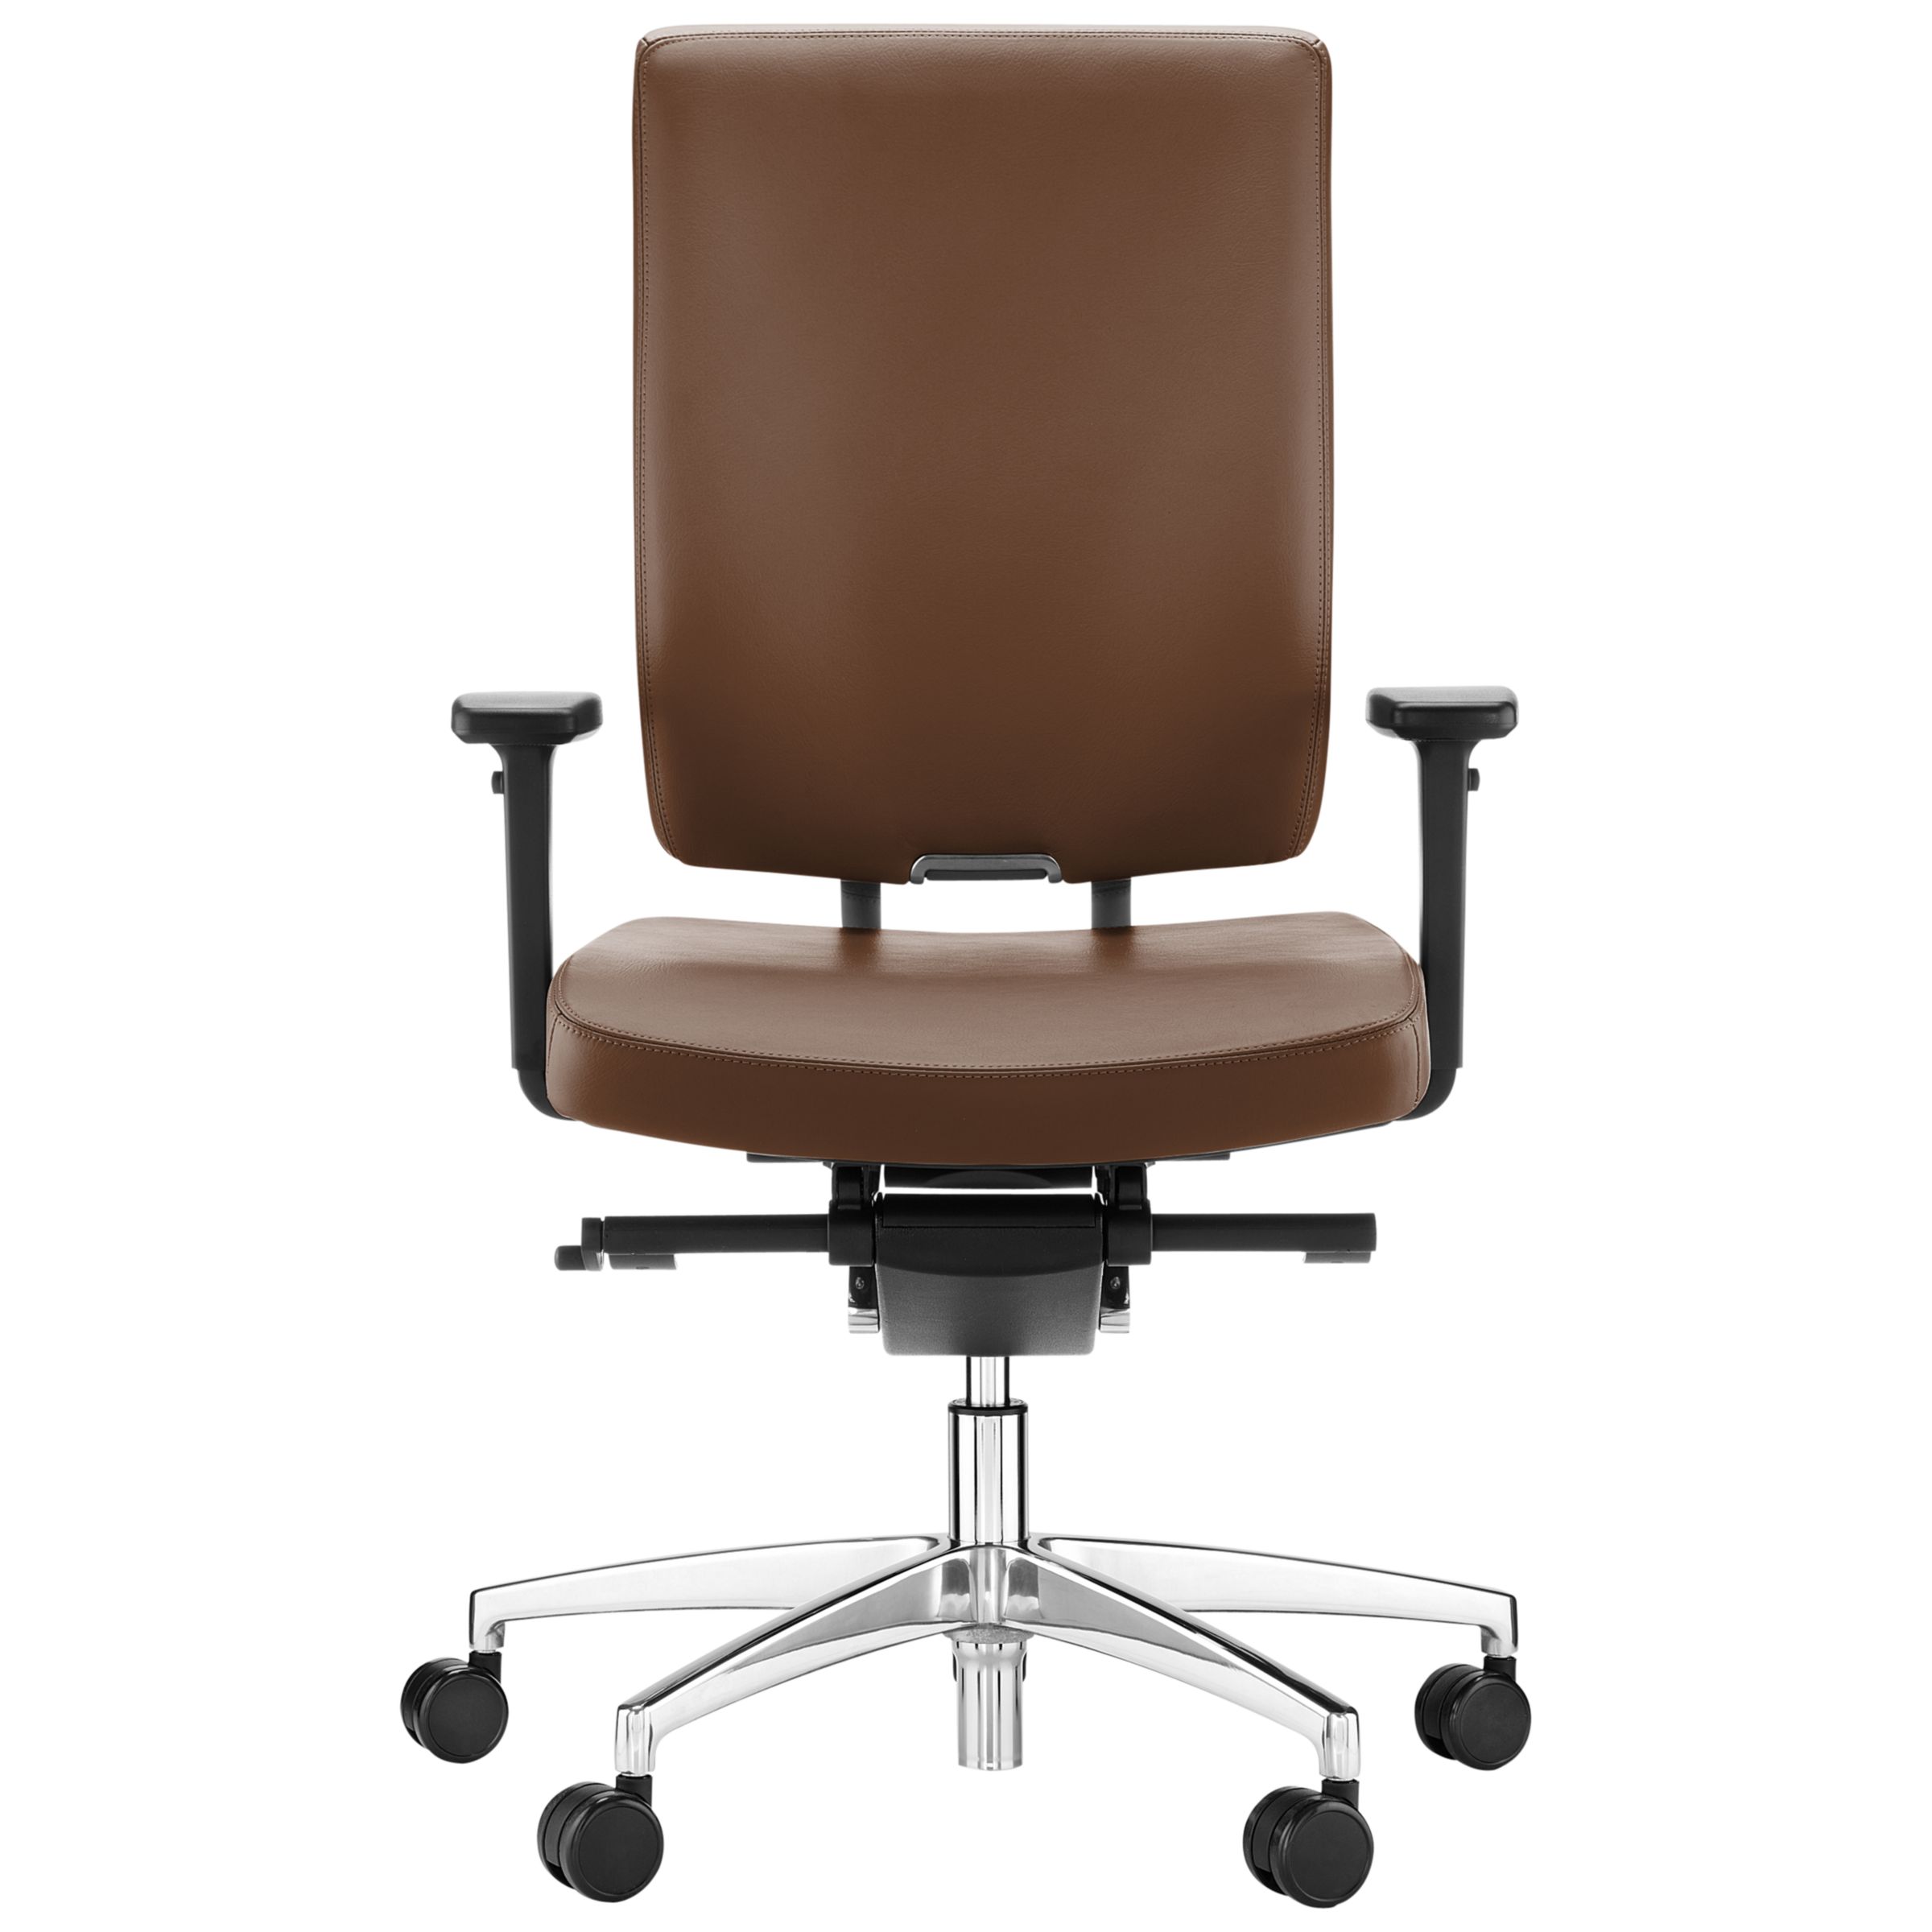 Boss Design Sona Leather Office Chair At John Lewis Partners